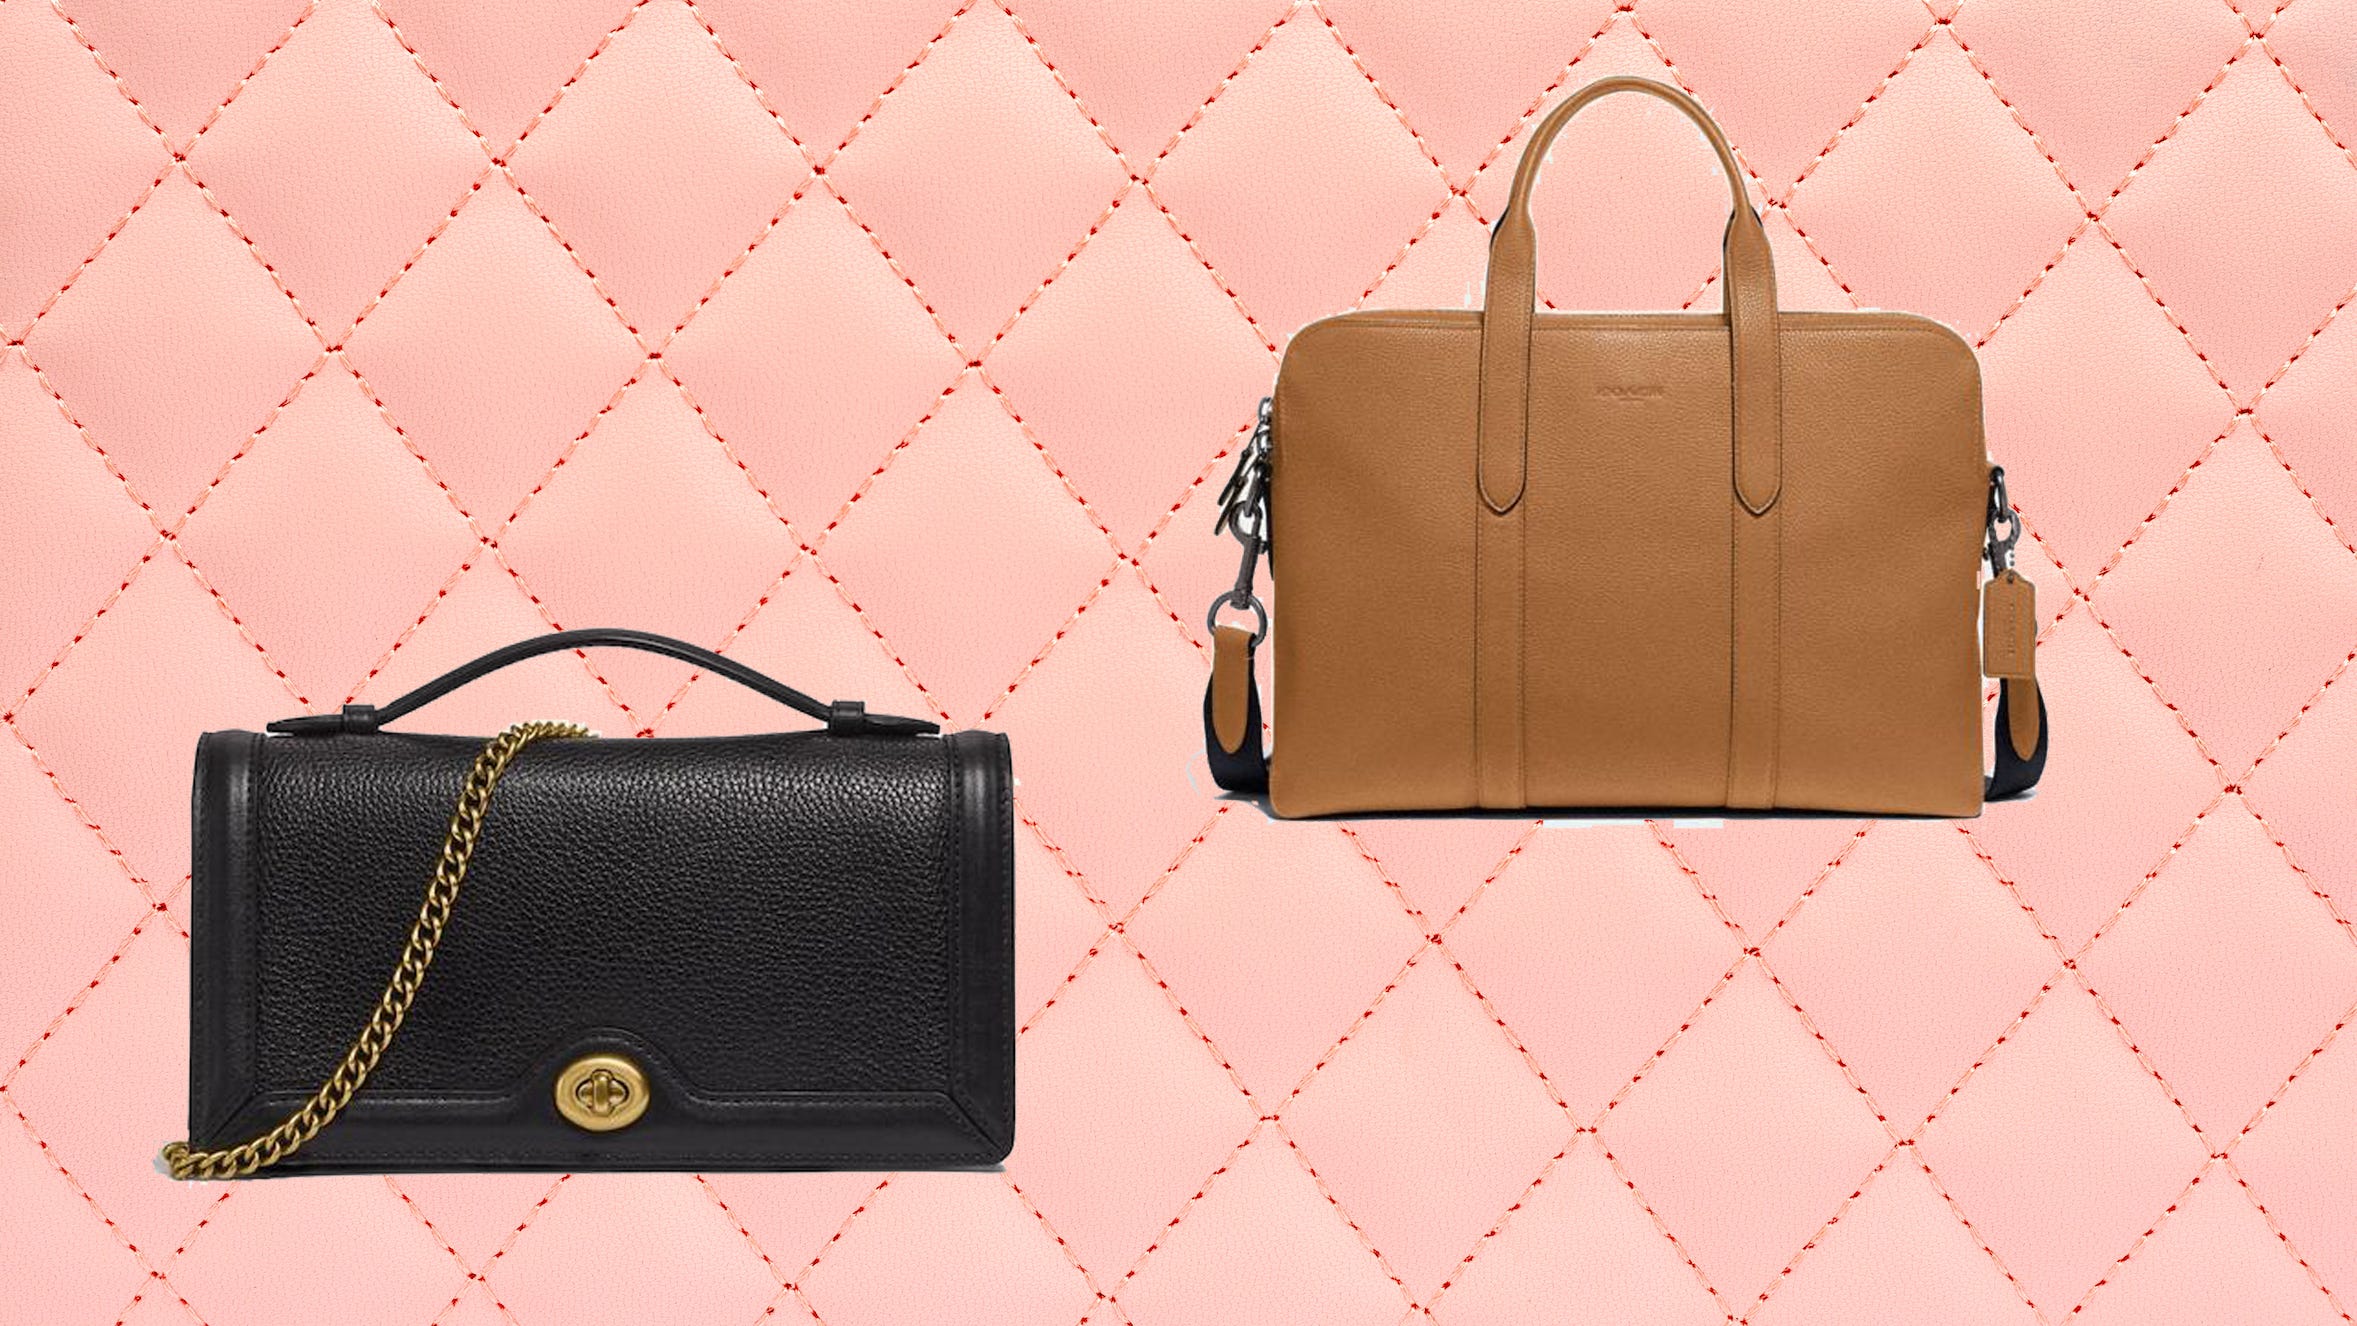 Black Friday 2020: This Coach bags sale is ripe with discounts